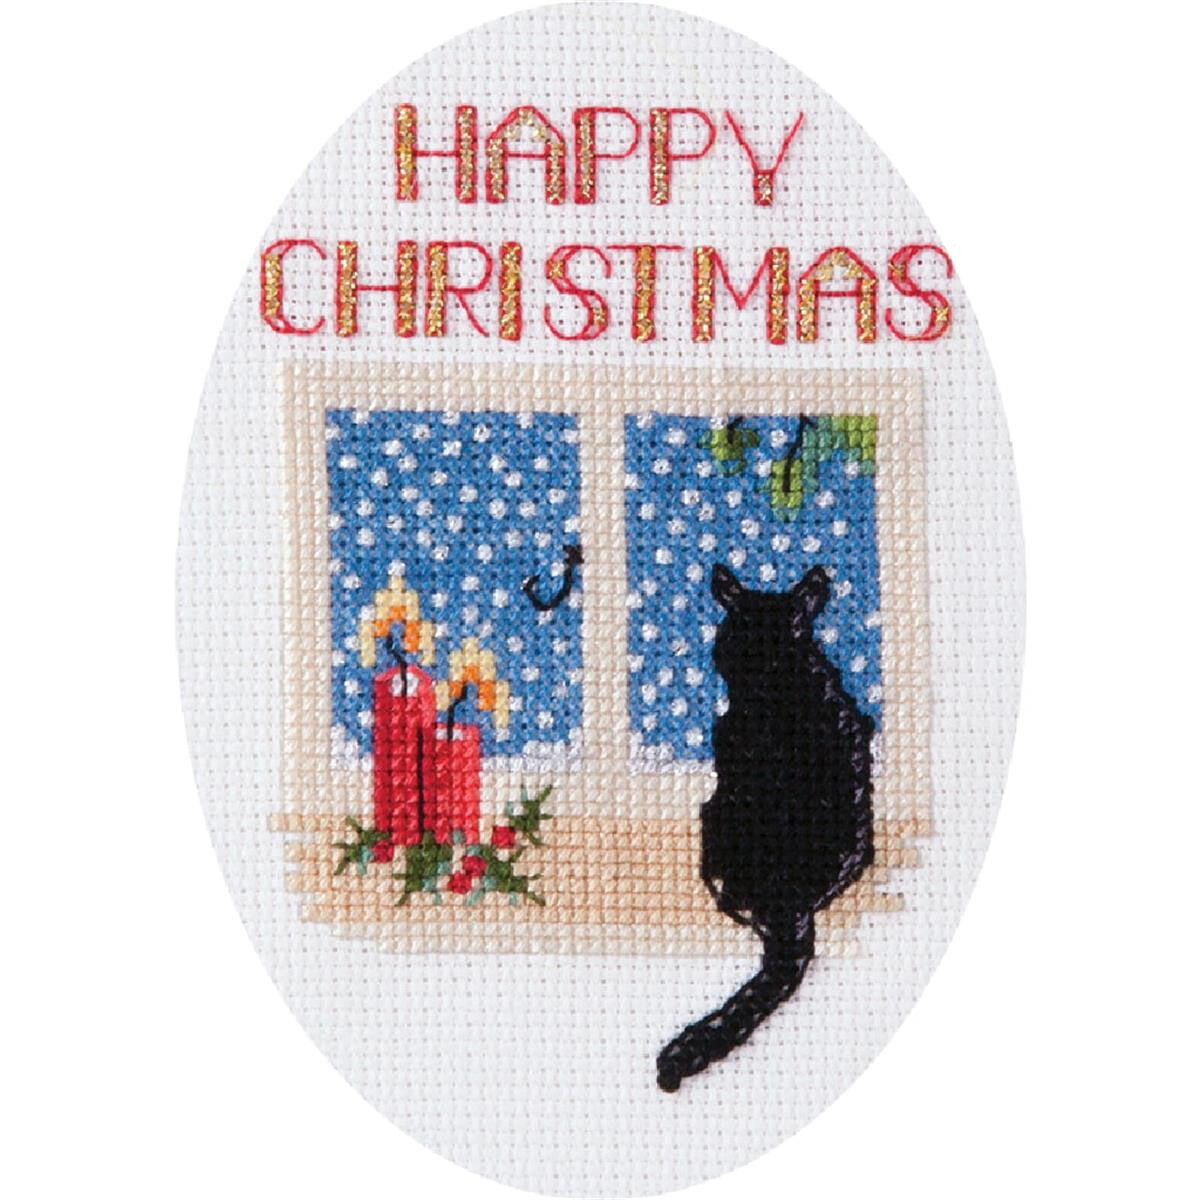 An oval cross stitch piece or embroidery pack with a...